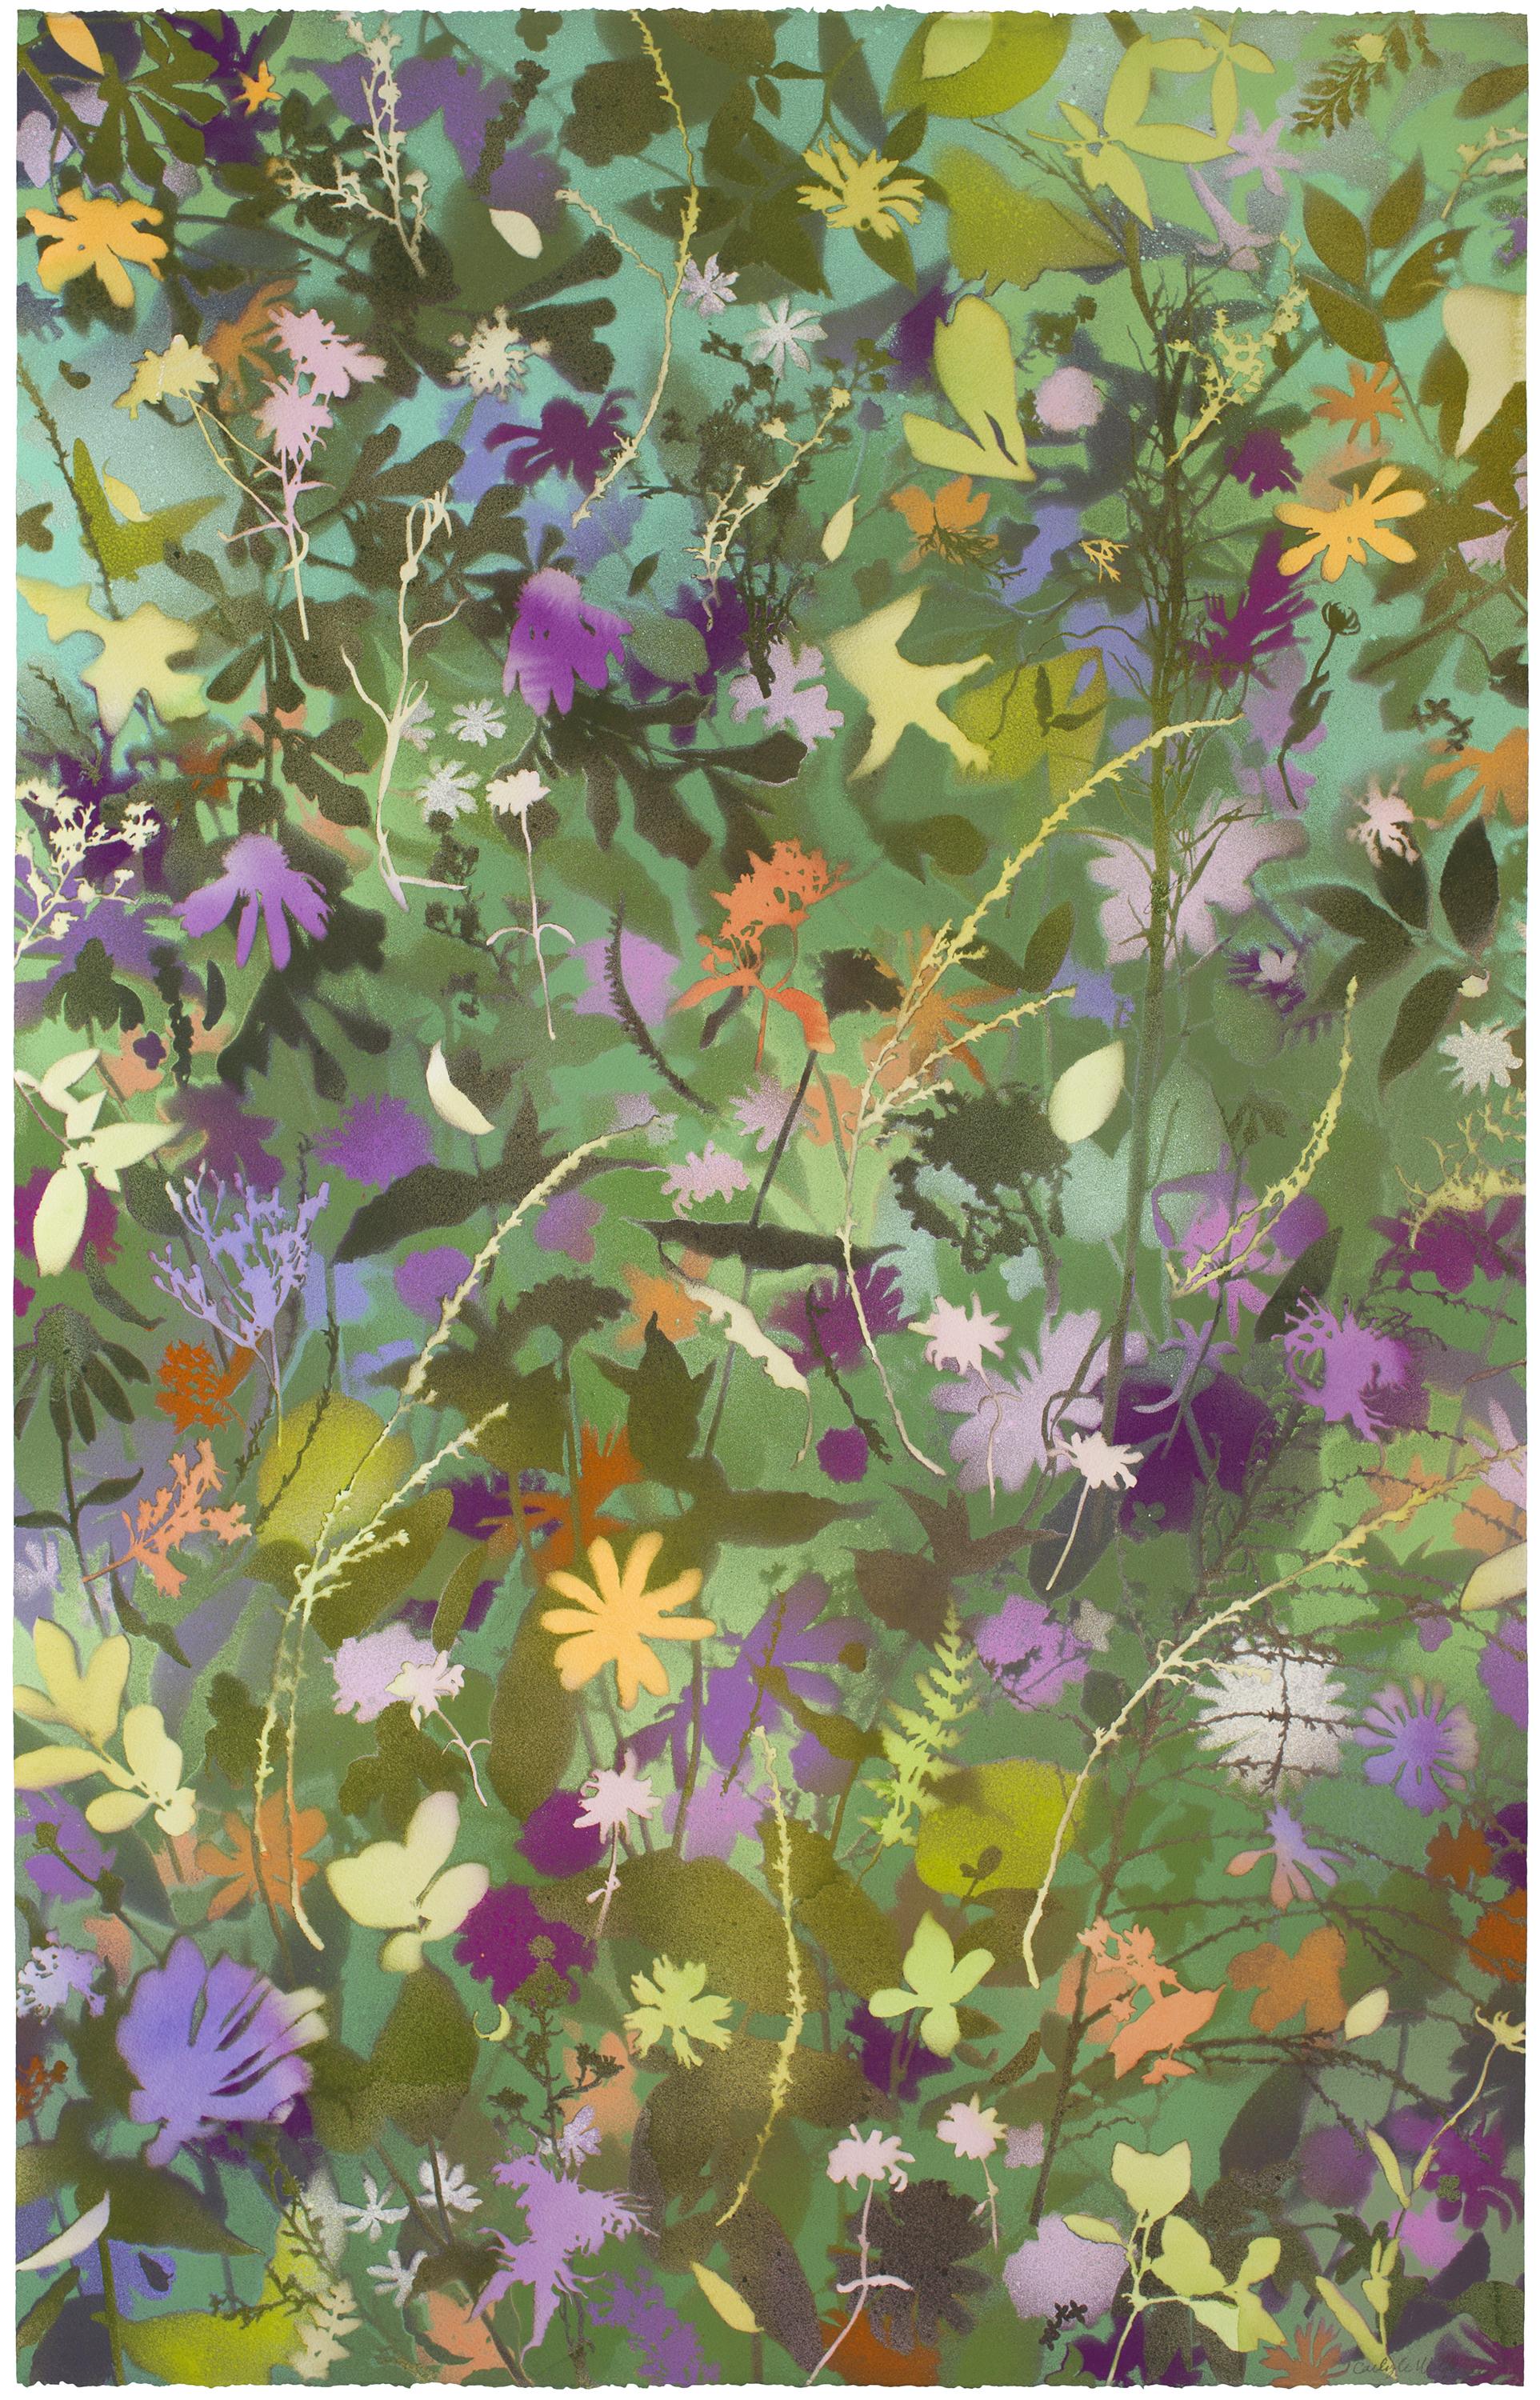 Carlyle Wolfe Lee Abstract Painting - 'Anniversary Wildflowers I' - naturalist landscape, colorful, botanical, layered